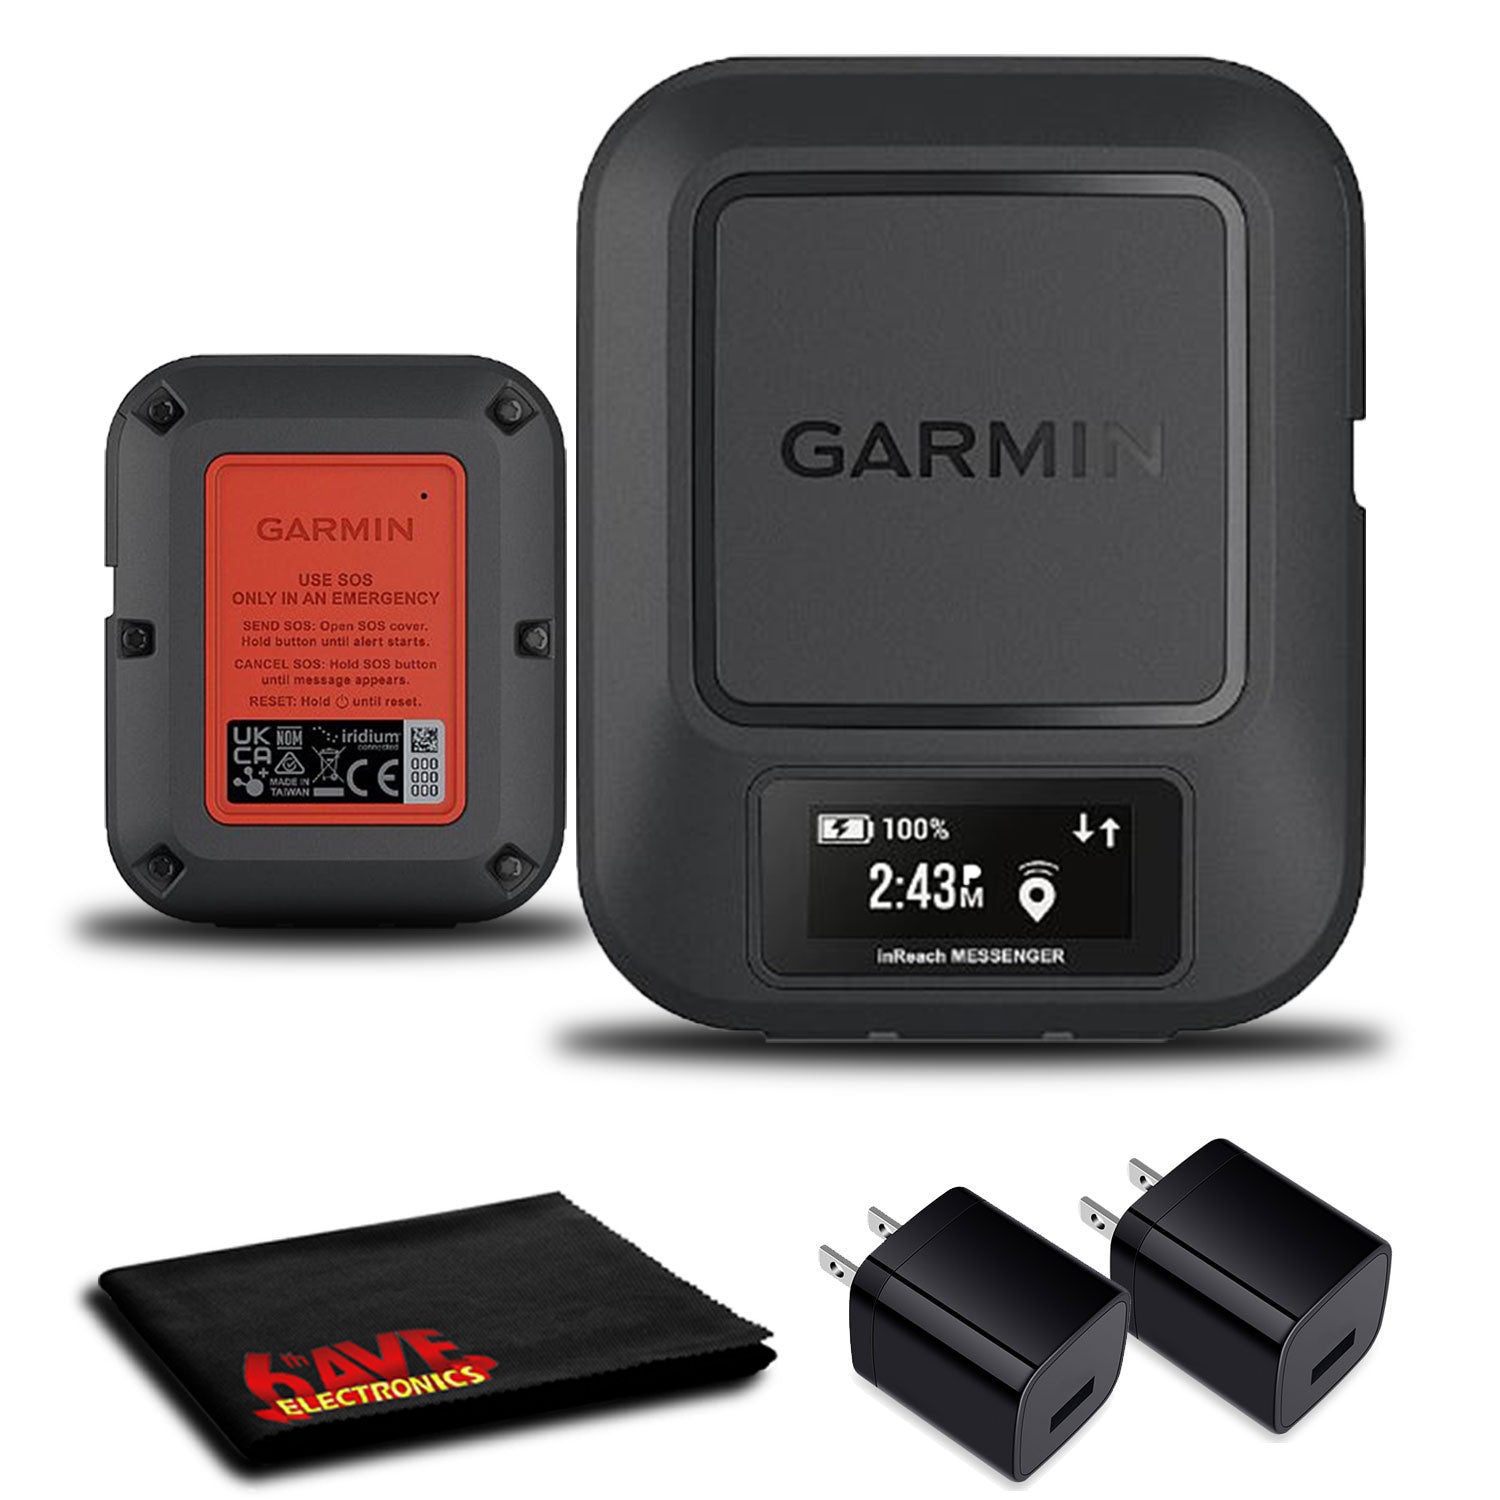 Garmin inReach Messenger GPS with Two USB Wall Adapters